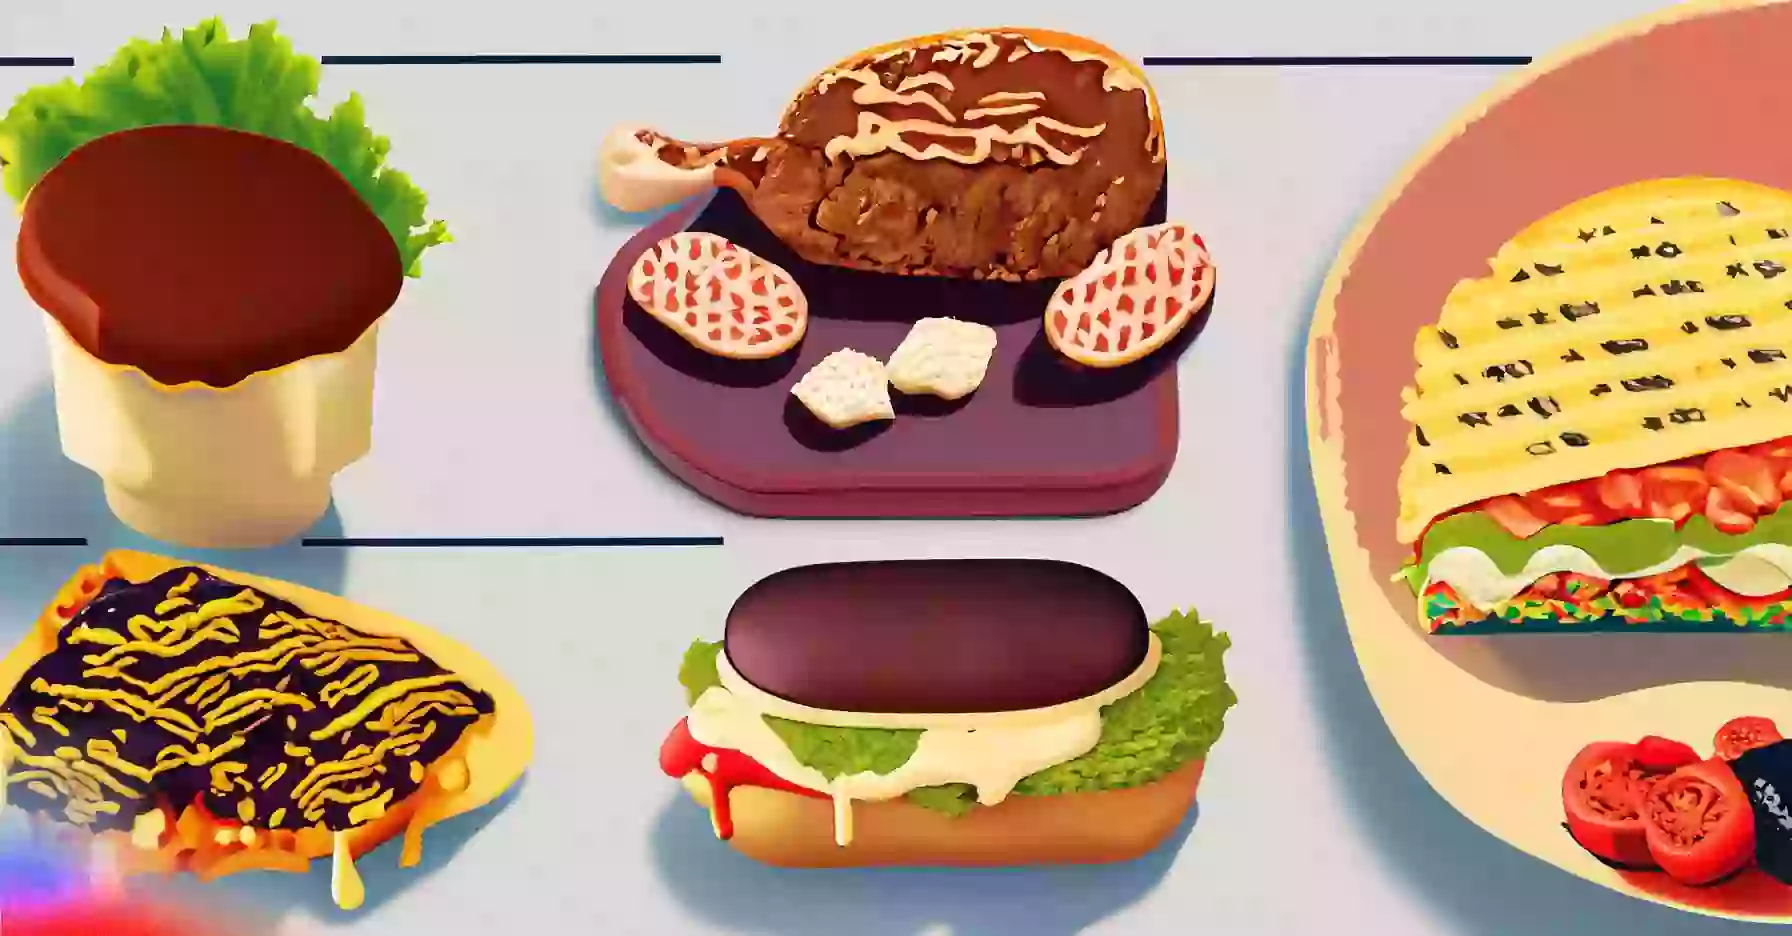 What Are the Types of American Food?